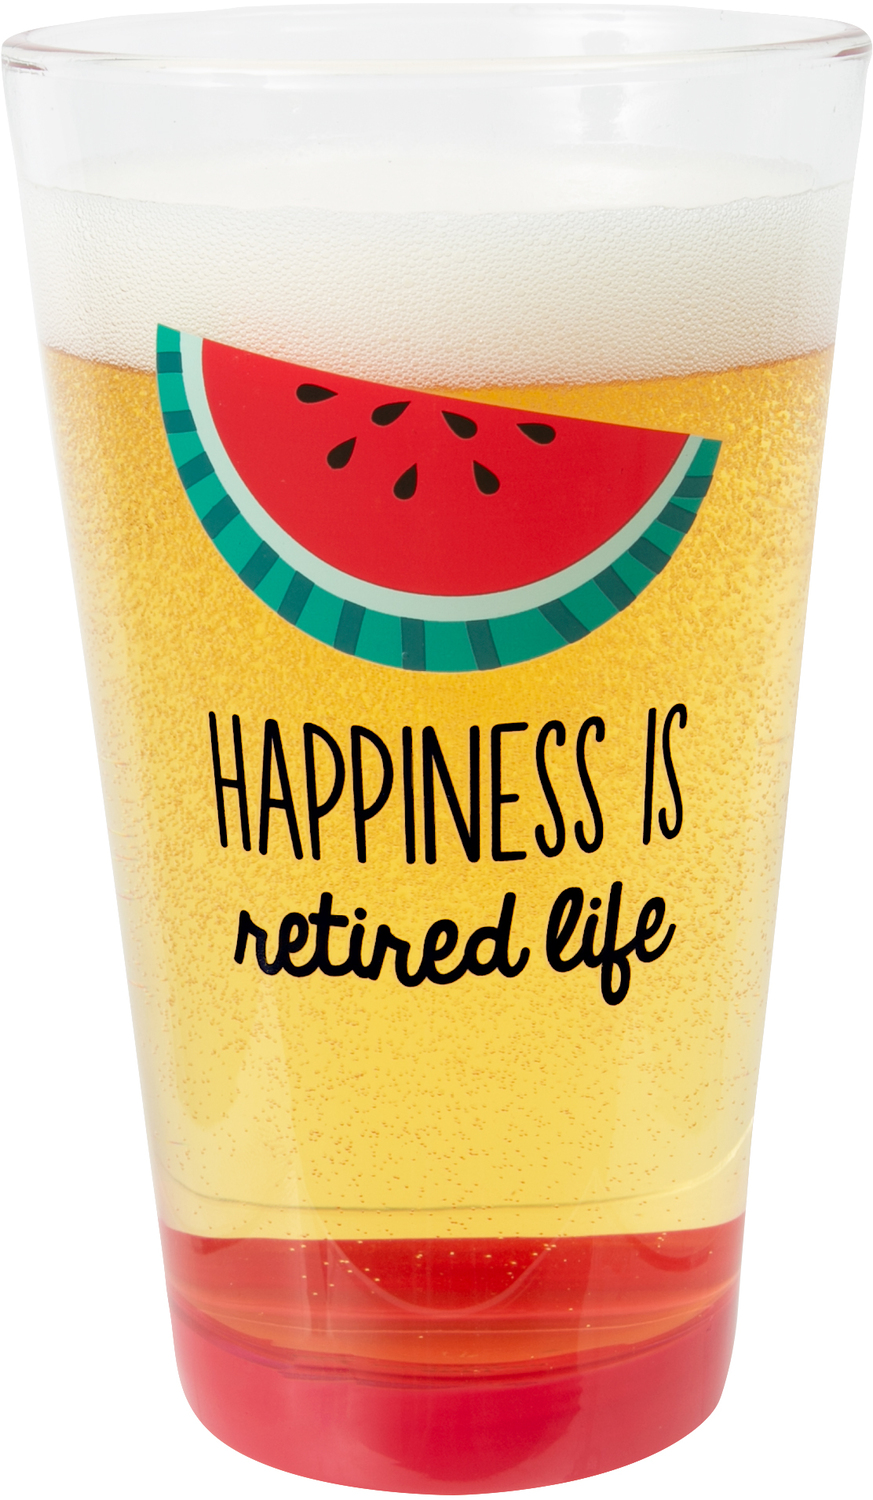 Happiness by Livin' on the Wedge - Happiness - 16 oz Pint Glass Tumbler